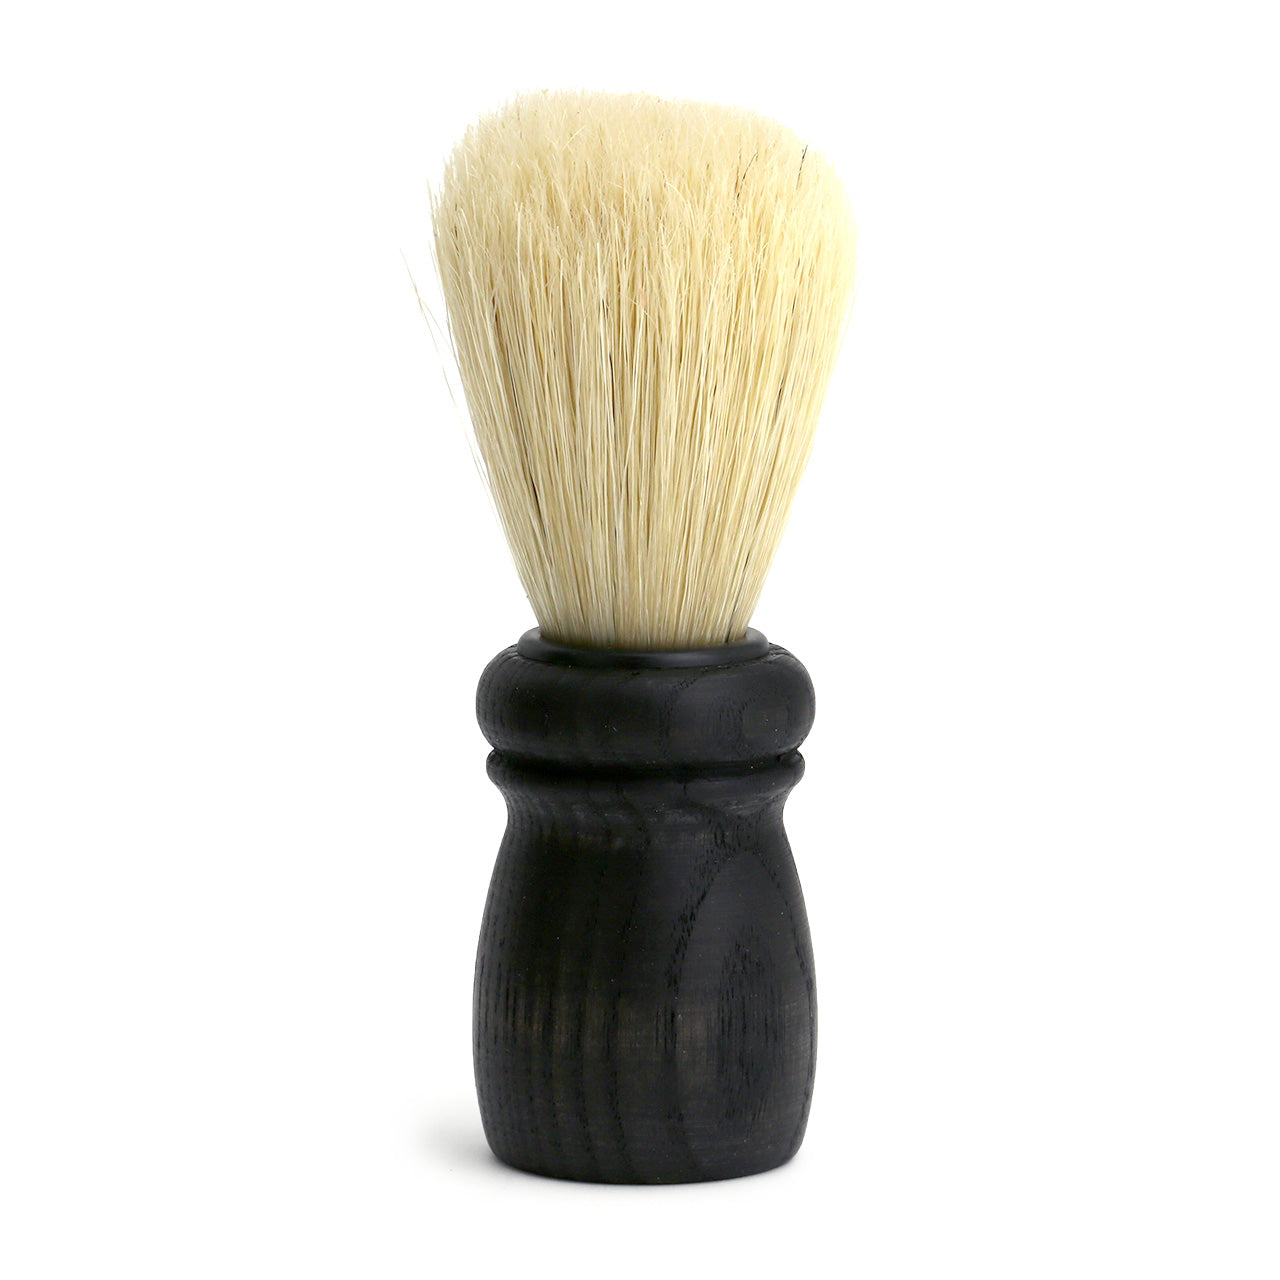 Natural Beechwood shaving brush with a substantial boar knot